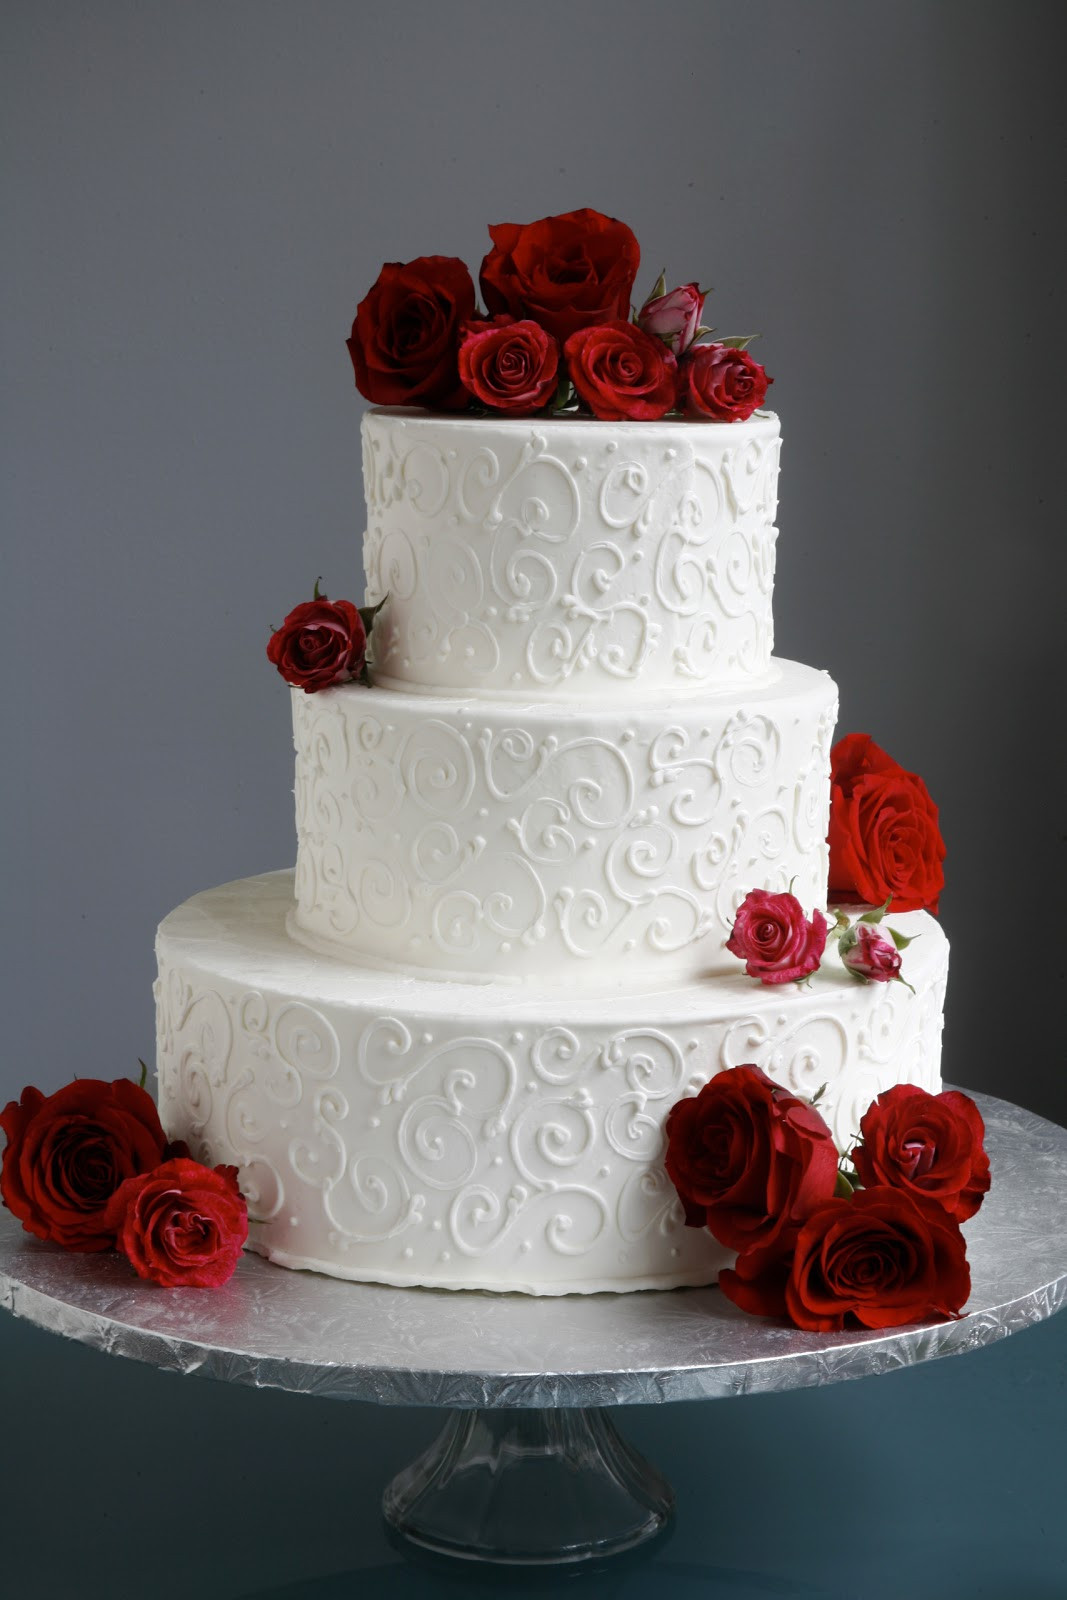 Roses Wedding Cakes
 A Simple Cake Wedding Cake with Fresh Flowers From